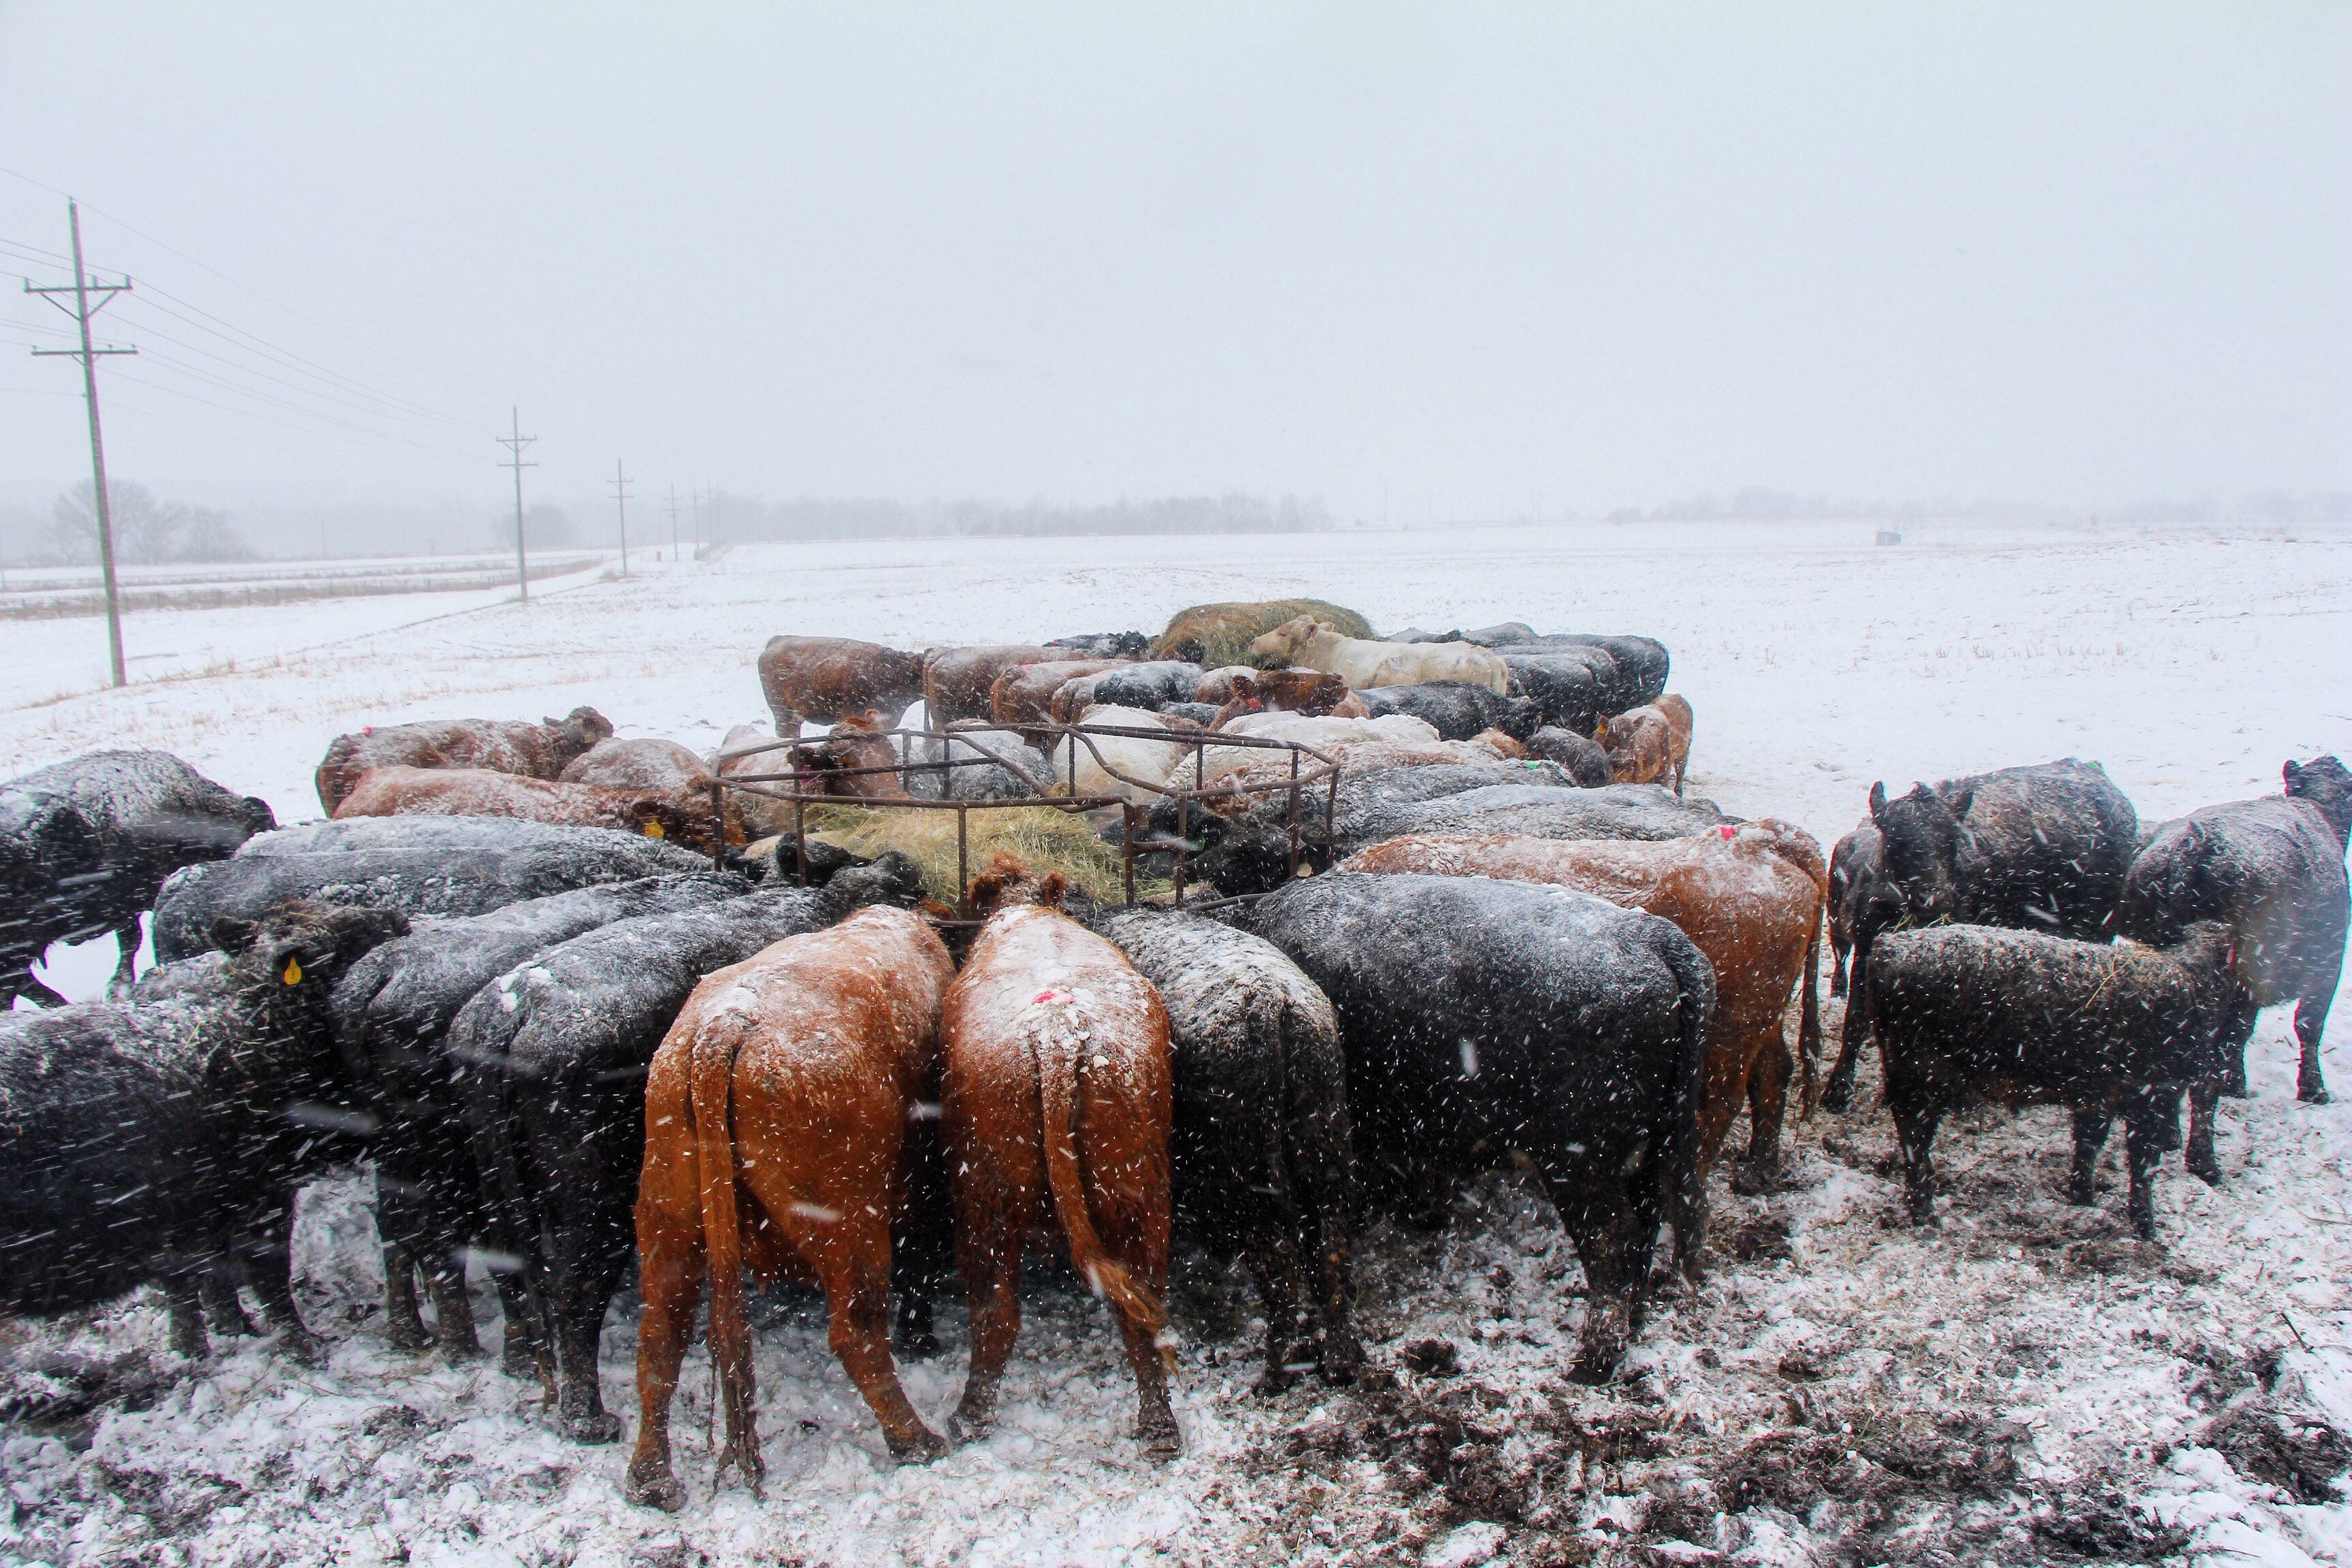 How are ranchers taking care of their cattle during winter storms?